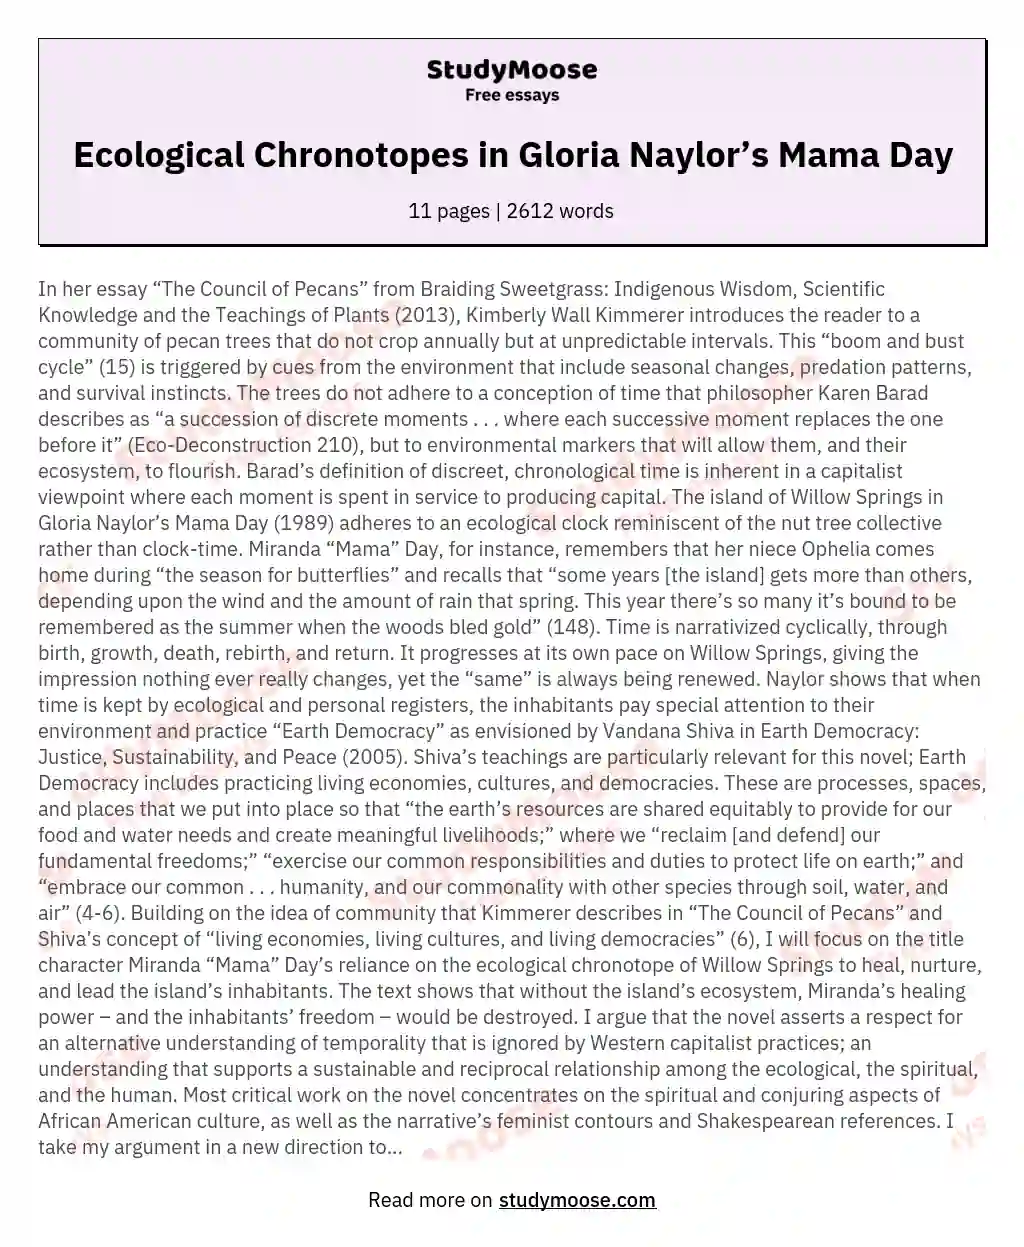 Ecological Chronotopes in Gloria Naylor’s Mama Day essay